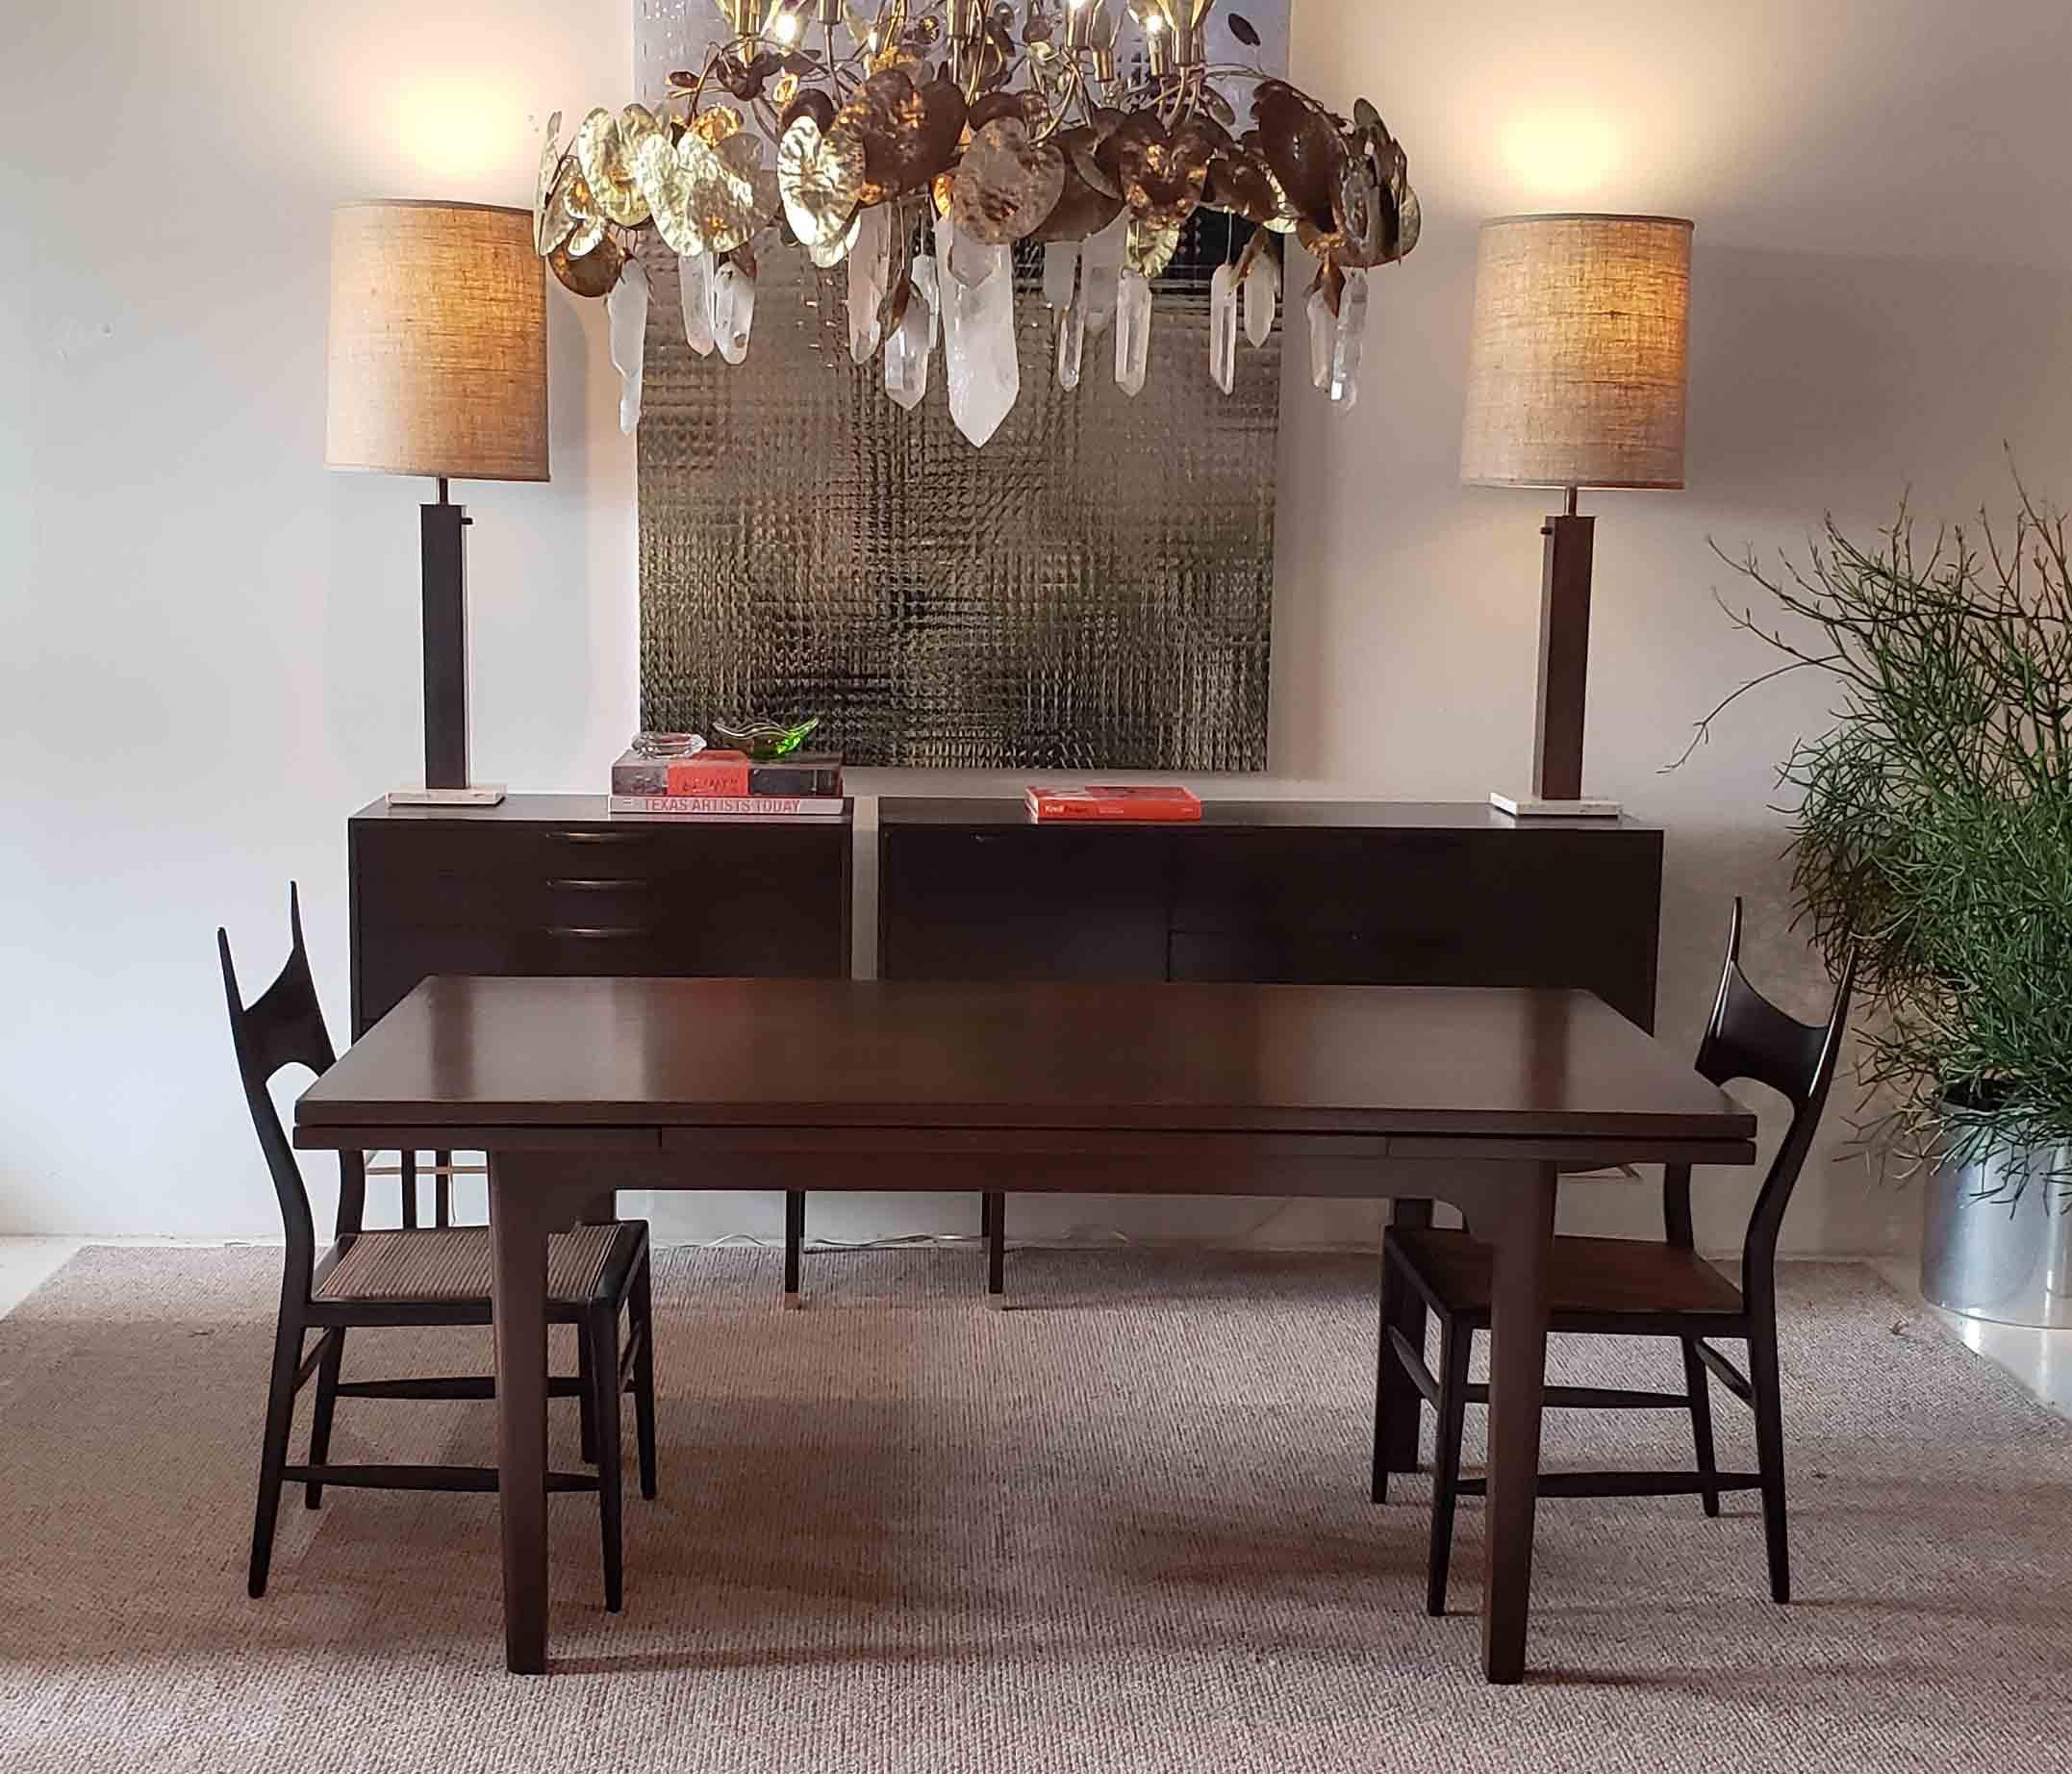 Dunbar dining table in a beautiful espresso stain with a clear satin lacquer finish. Completely restored. The leaves pull out and lock into position with the simple pull of one hand. A gorgeous and ingeniously engineered design.

The top measure